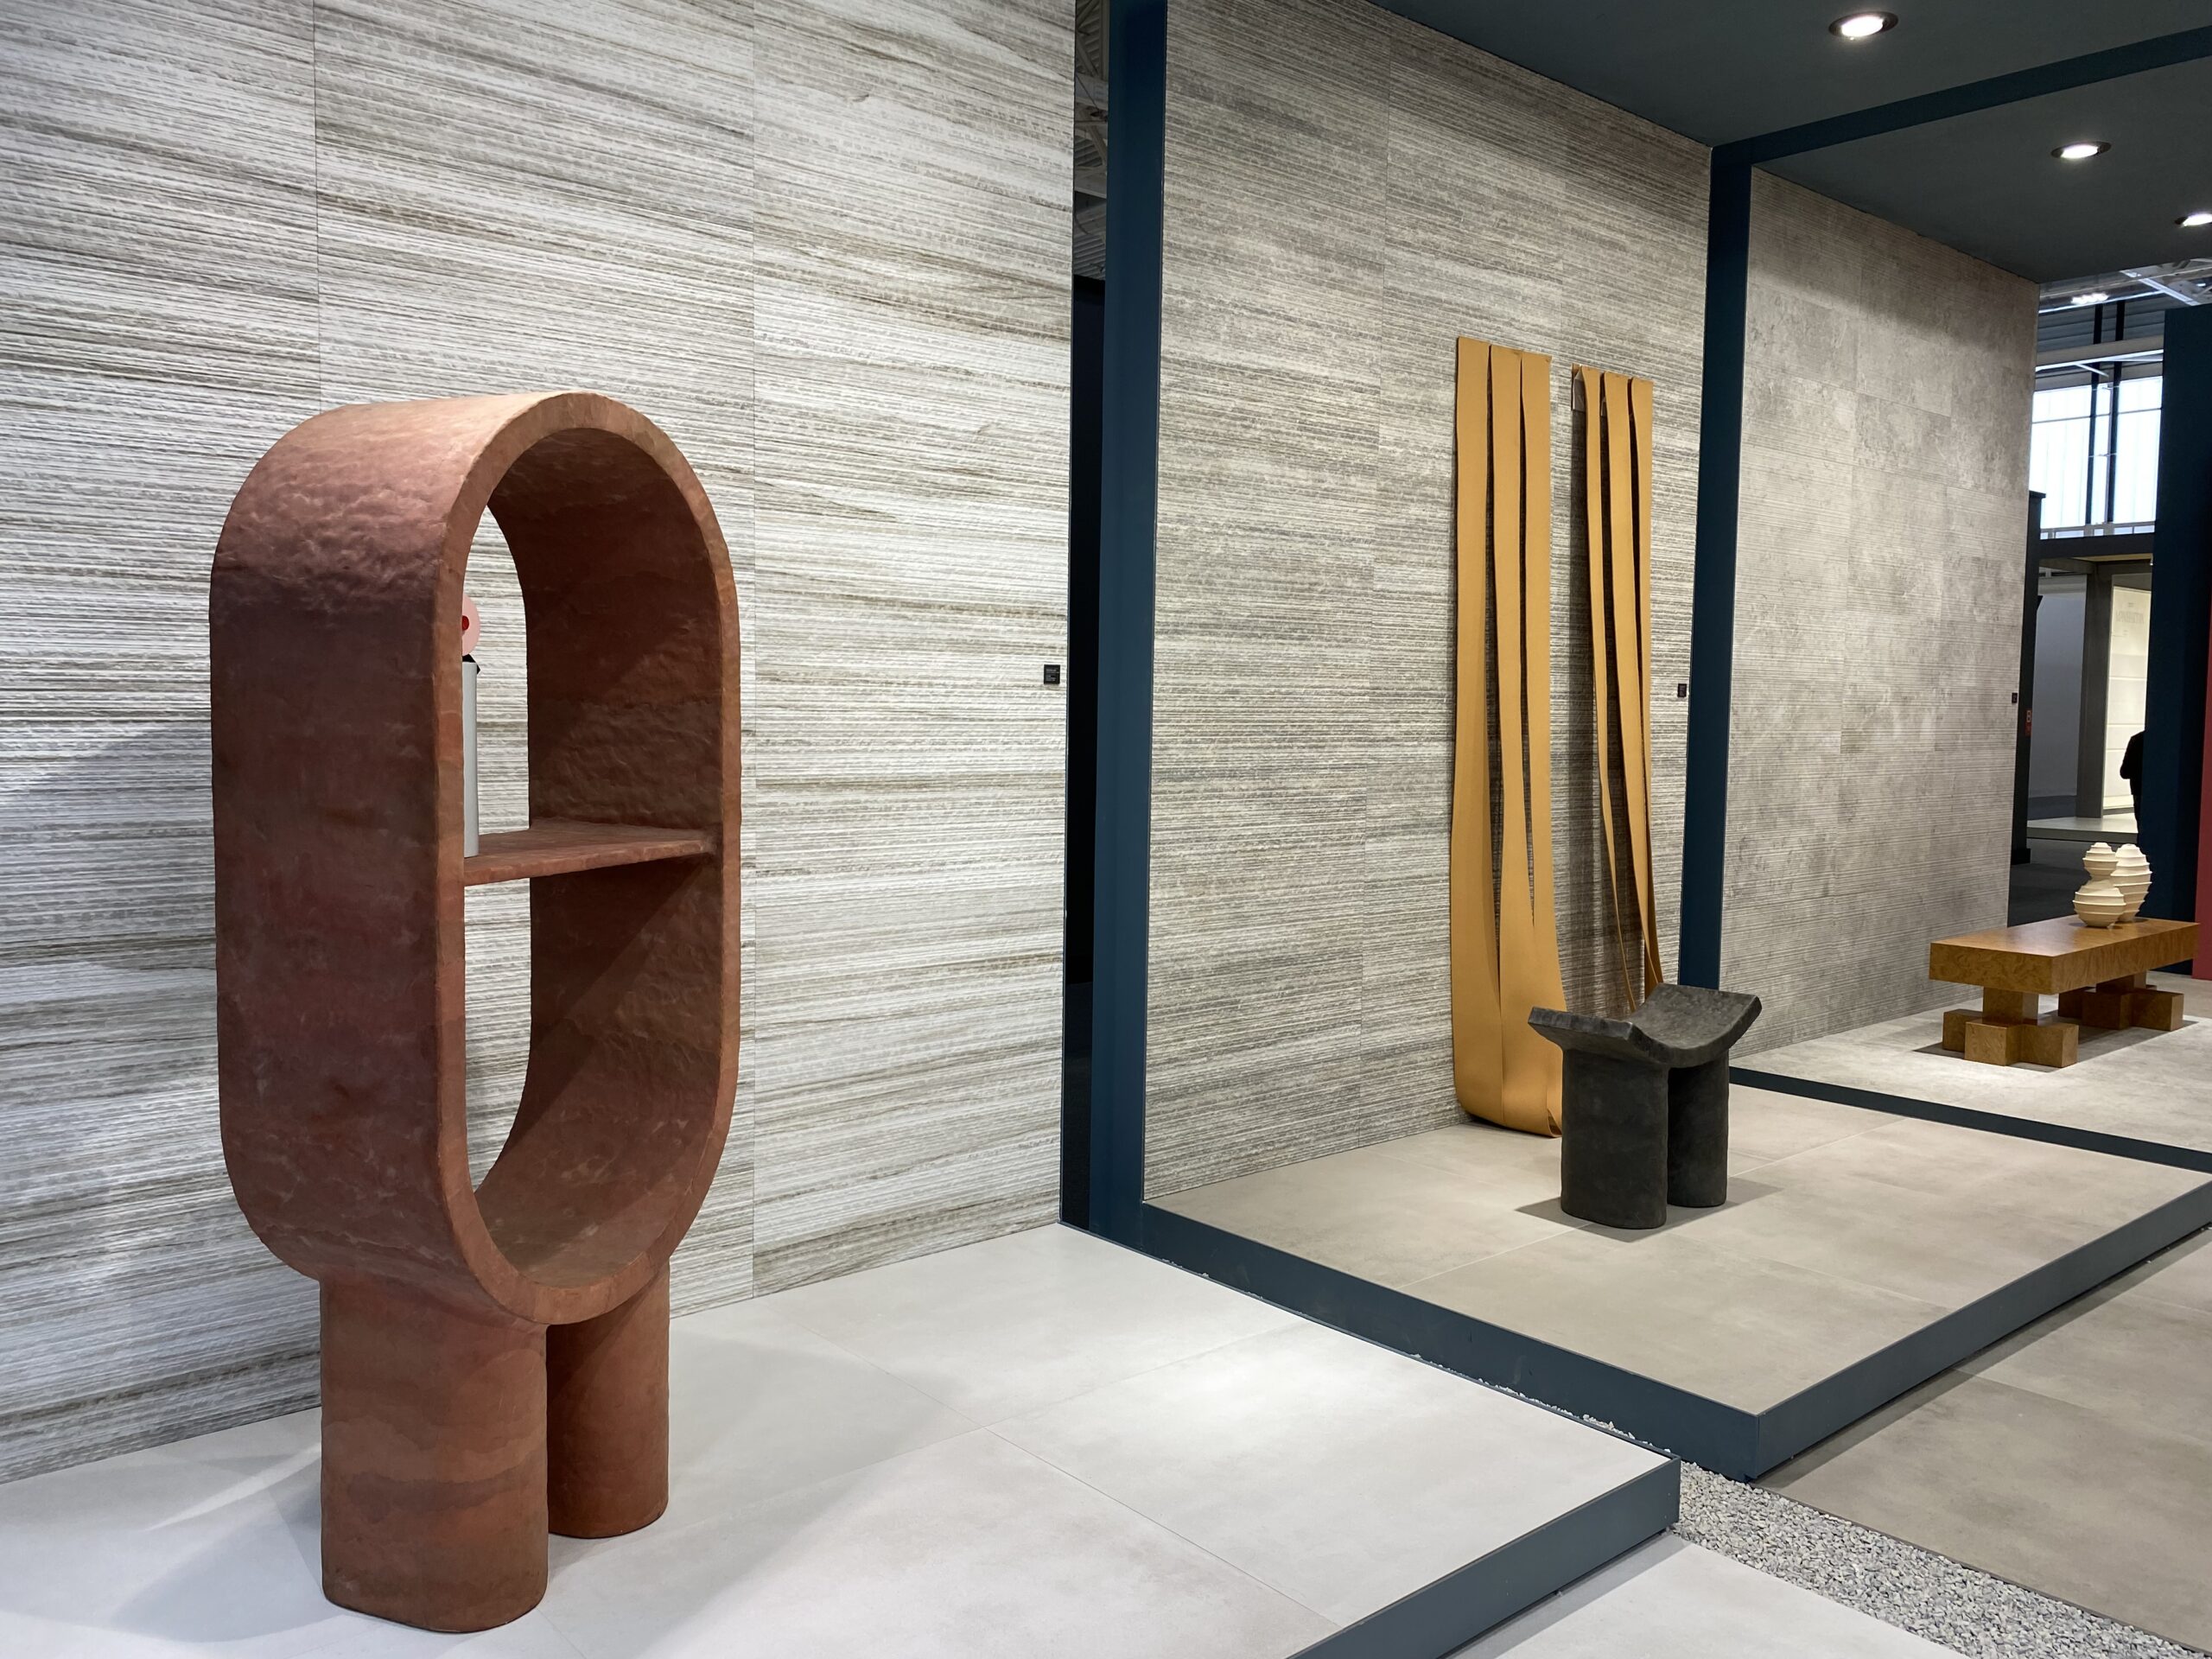 An abundance of details, colors, stones and wood: CERSAIE 2022